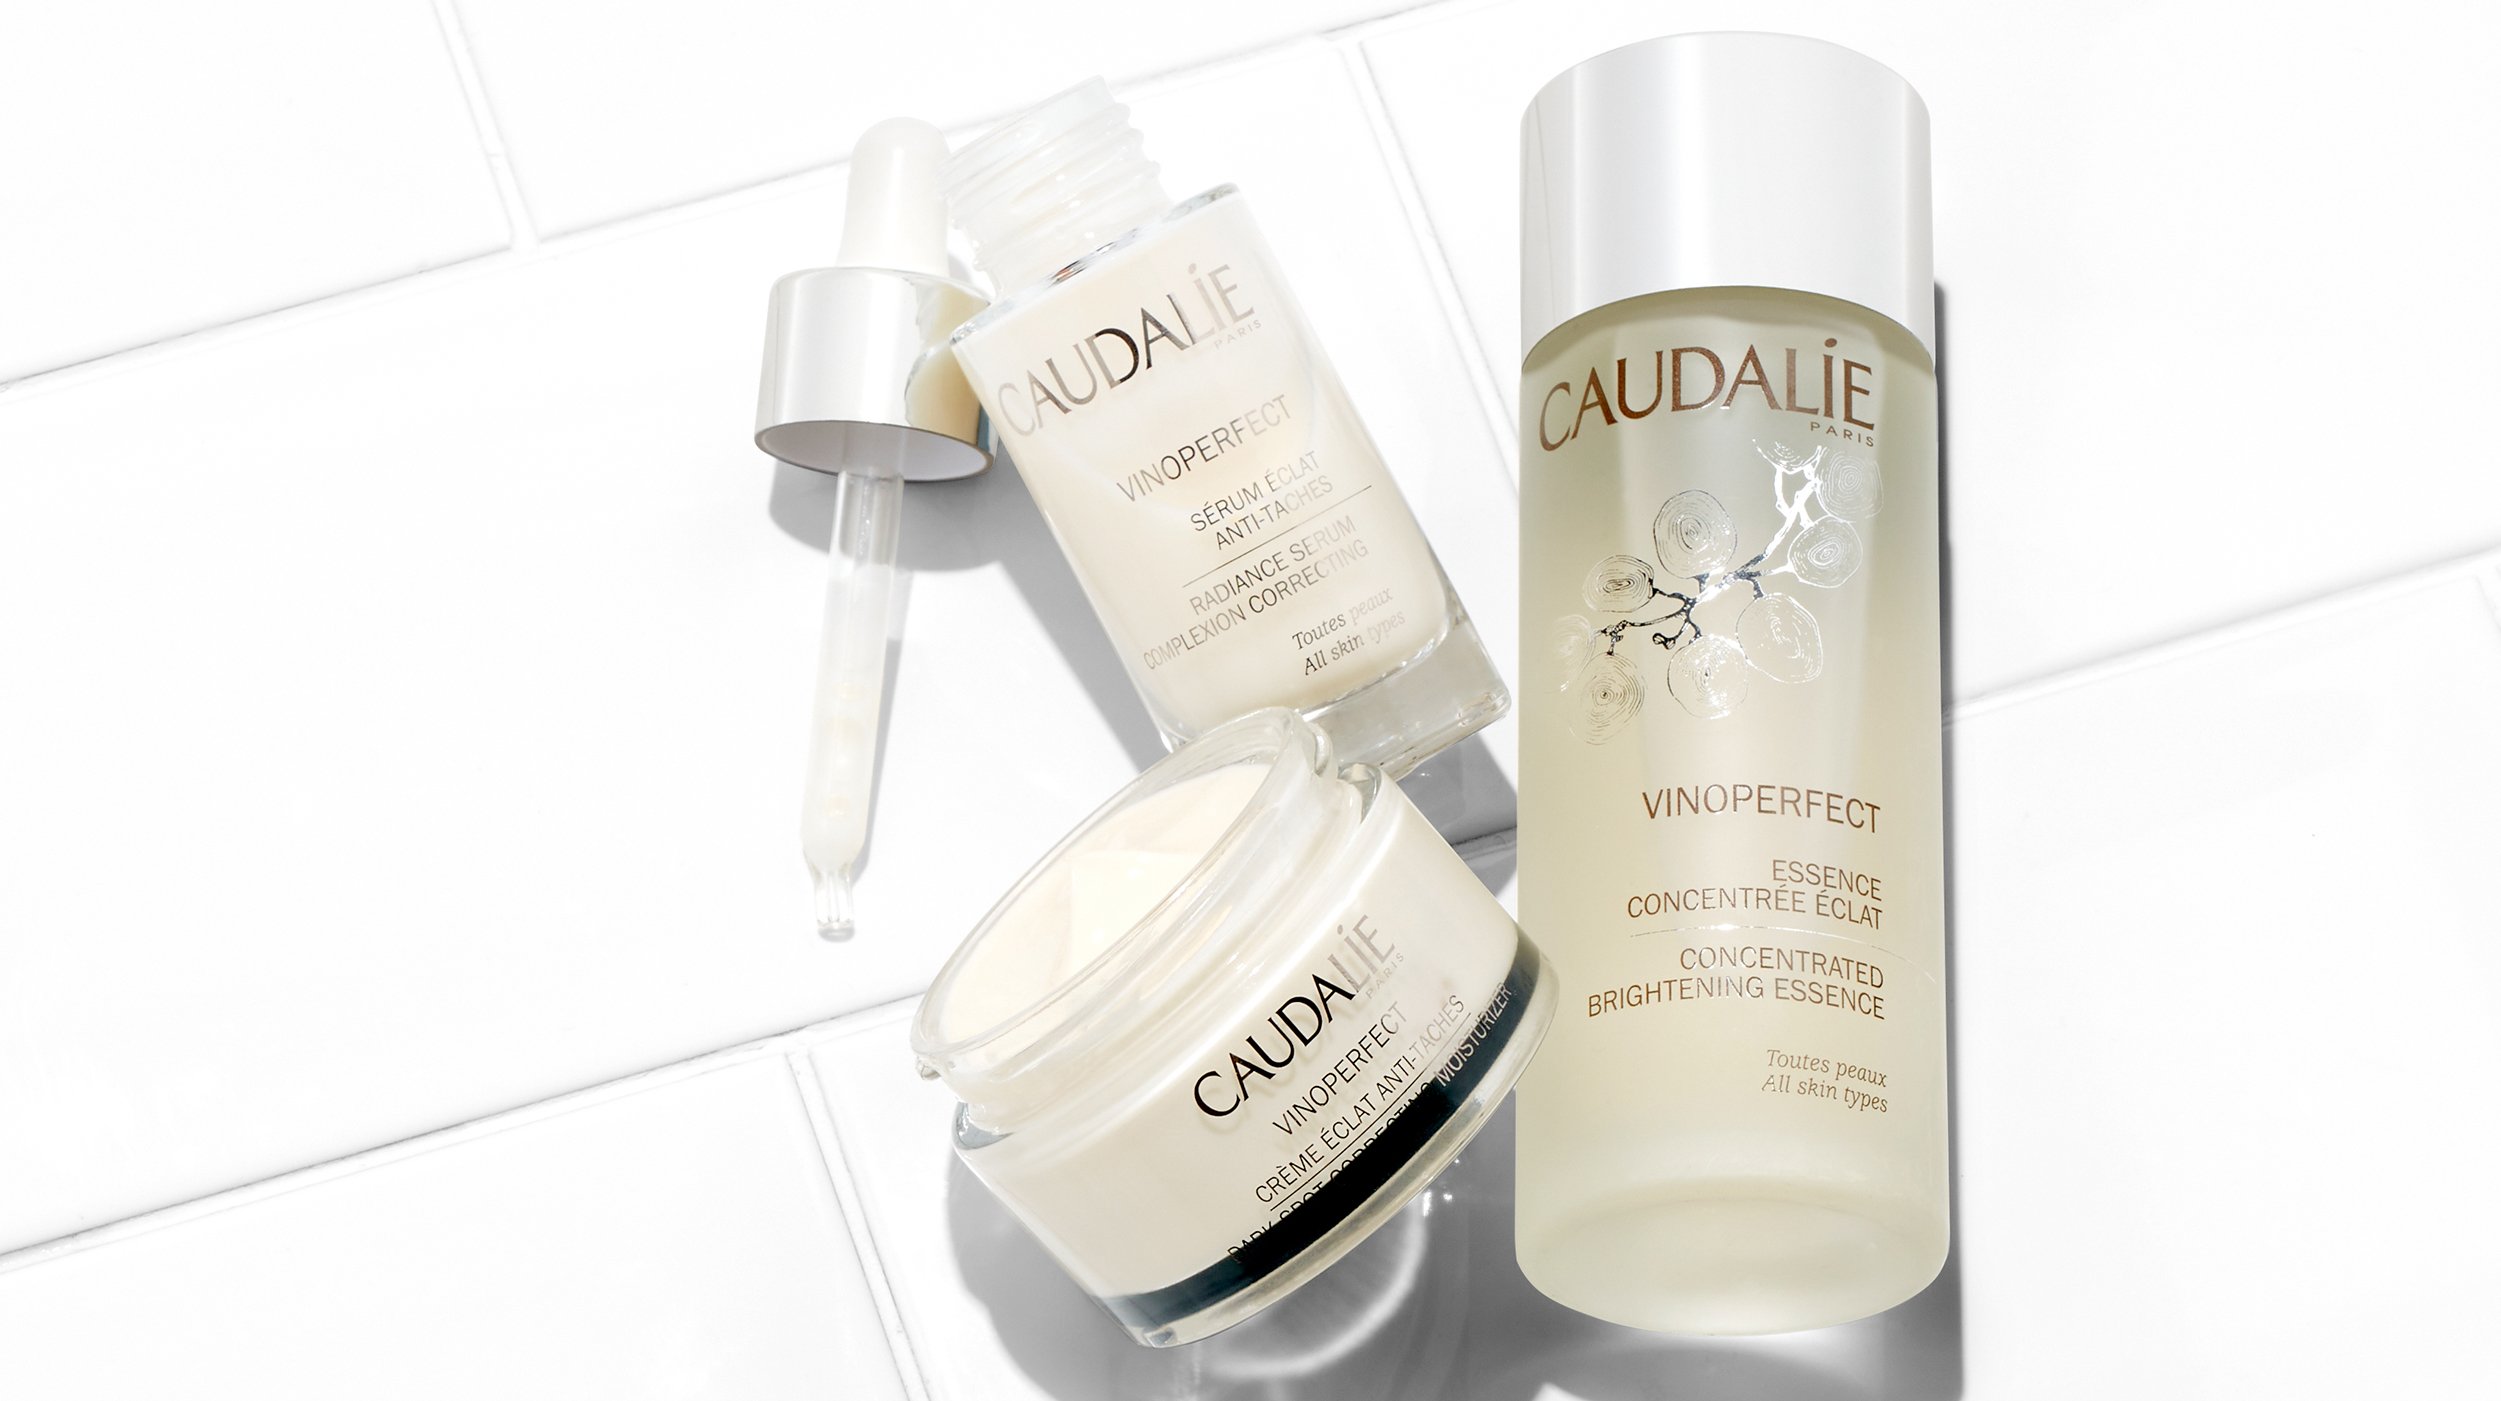 June brand of the month; an exclusive interview with Caudalie founder Mathilde Thomas